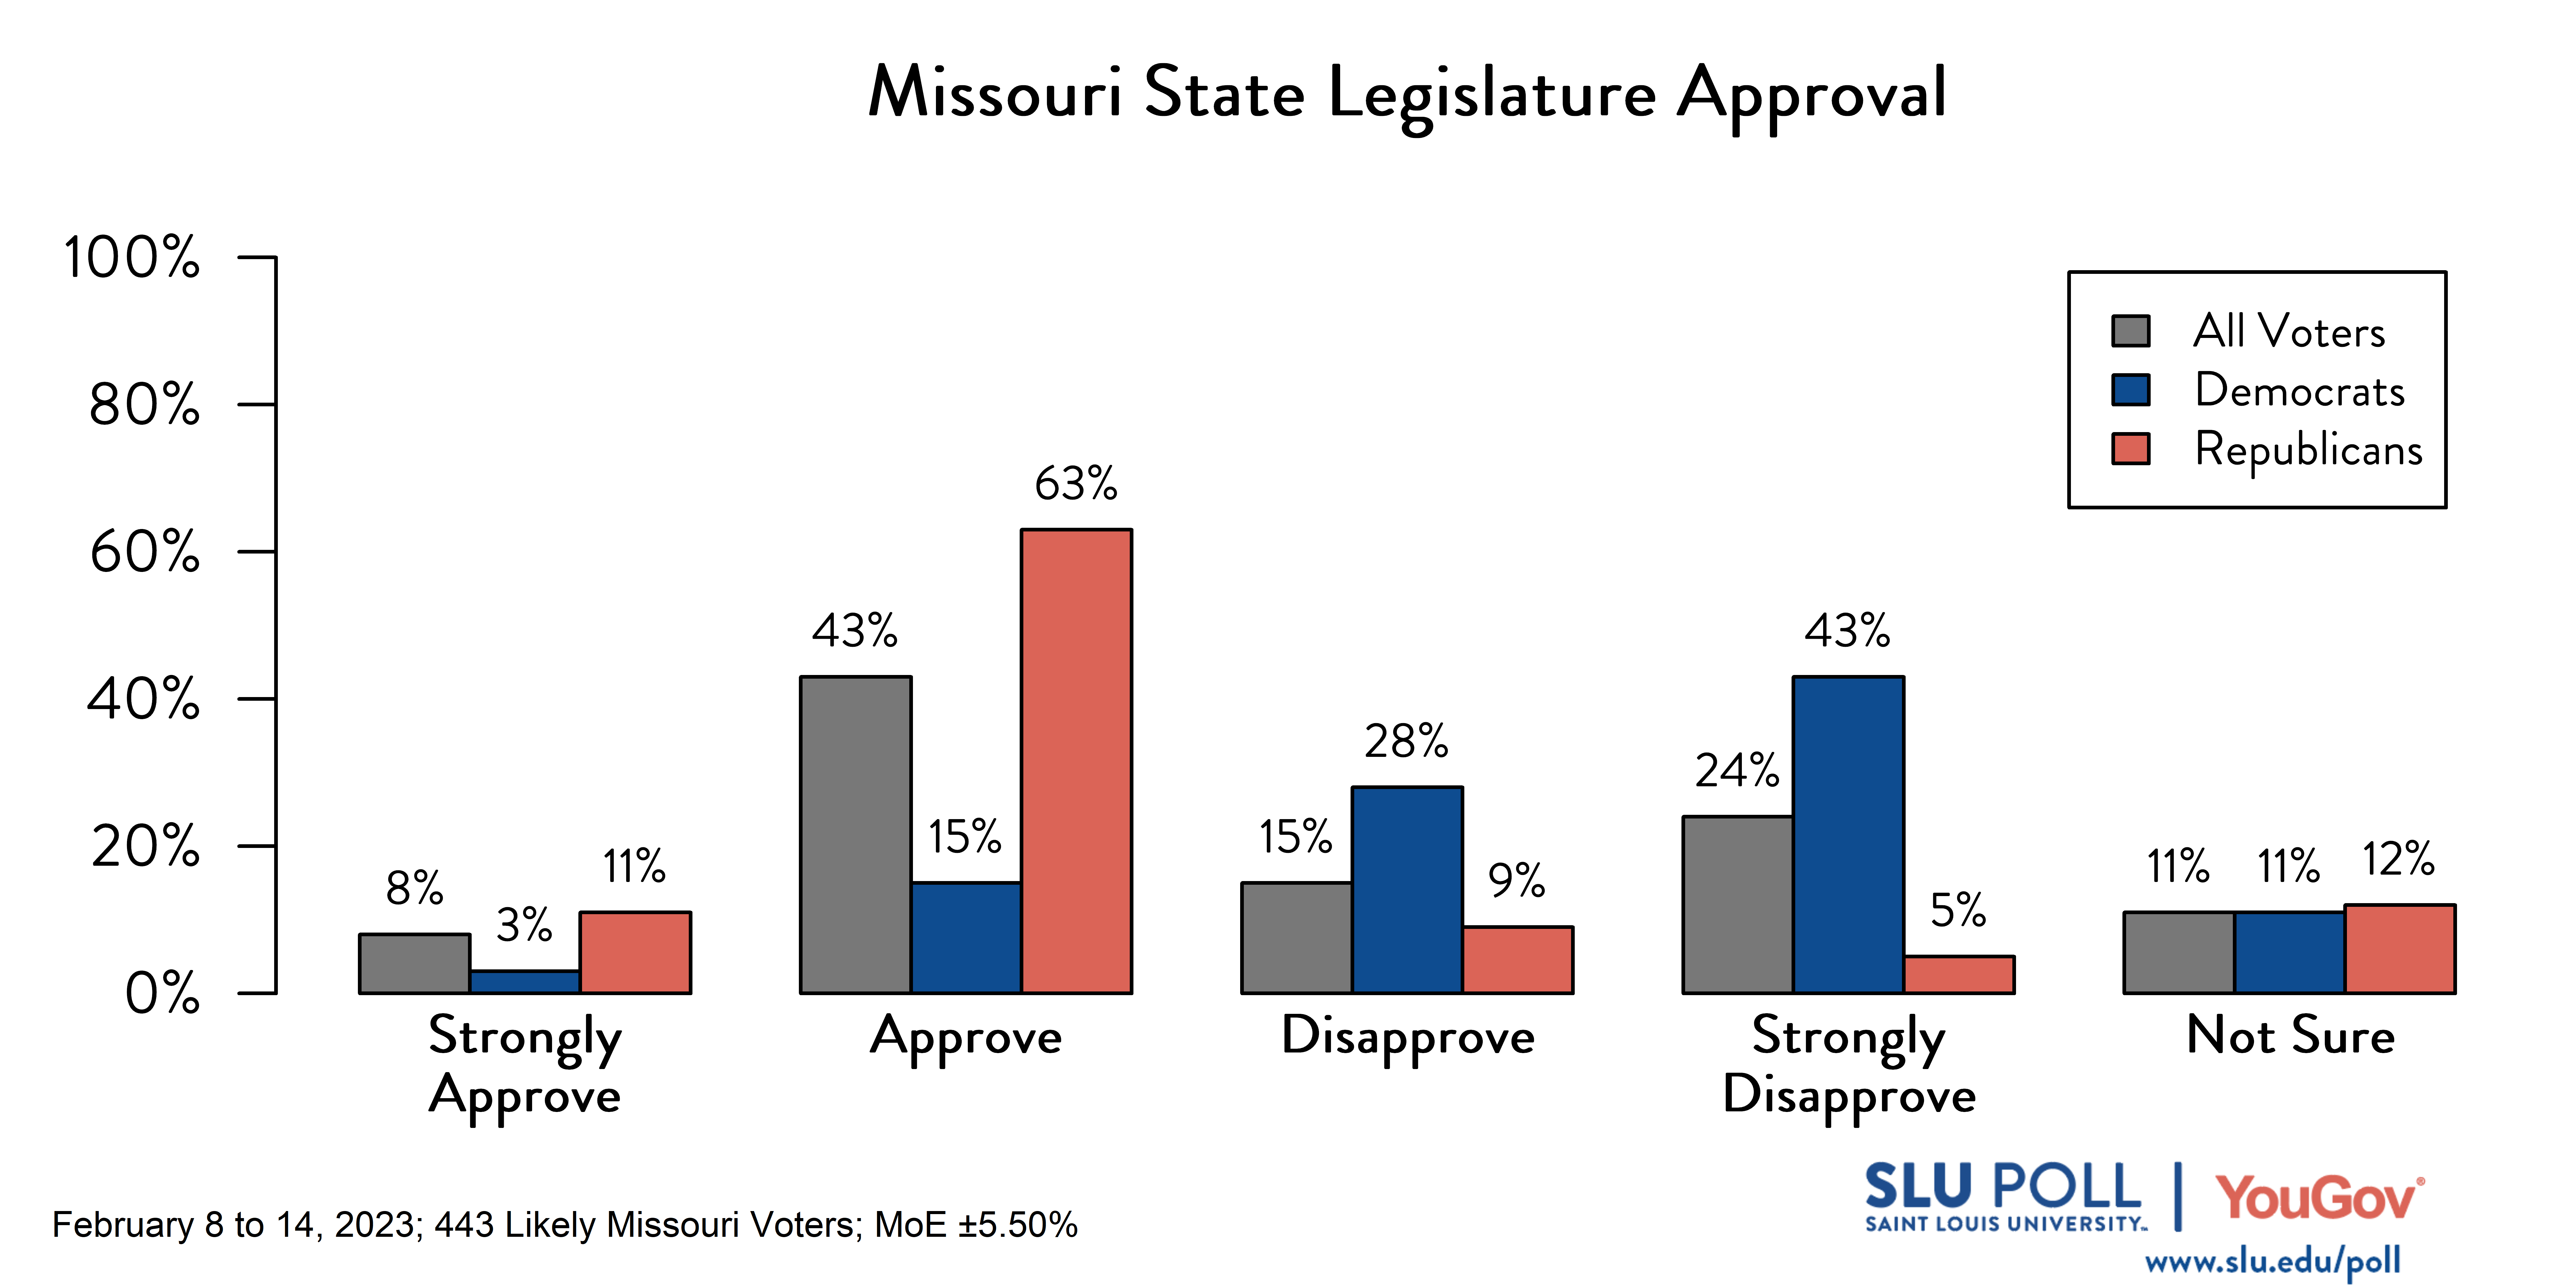 Likely voters' responses to 'Do you approve or disapprove of the way each is doing their job: The Missouri State Legislature?': 8% Strongly approve, 43% Approve, 15% Disapprove, 24% Strongly disapprove, and 11% Not sure. Democratic voters' responses: ' 3% Strongly approve, 15% Approve, 28% Disapprove, 43% Strongly disapprove, and 11% Not sure. Republican voters' responses: 11% Strongly approve, 63% Approve, 9% Disapprove, 5% Strongly disapprove, and 12% Not sure. 